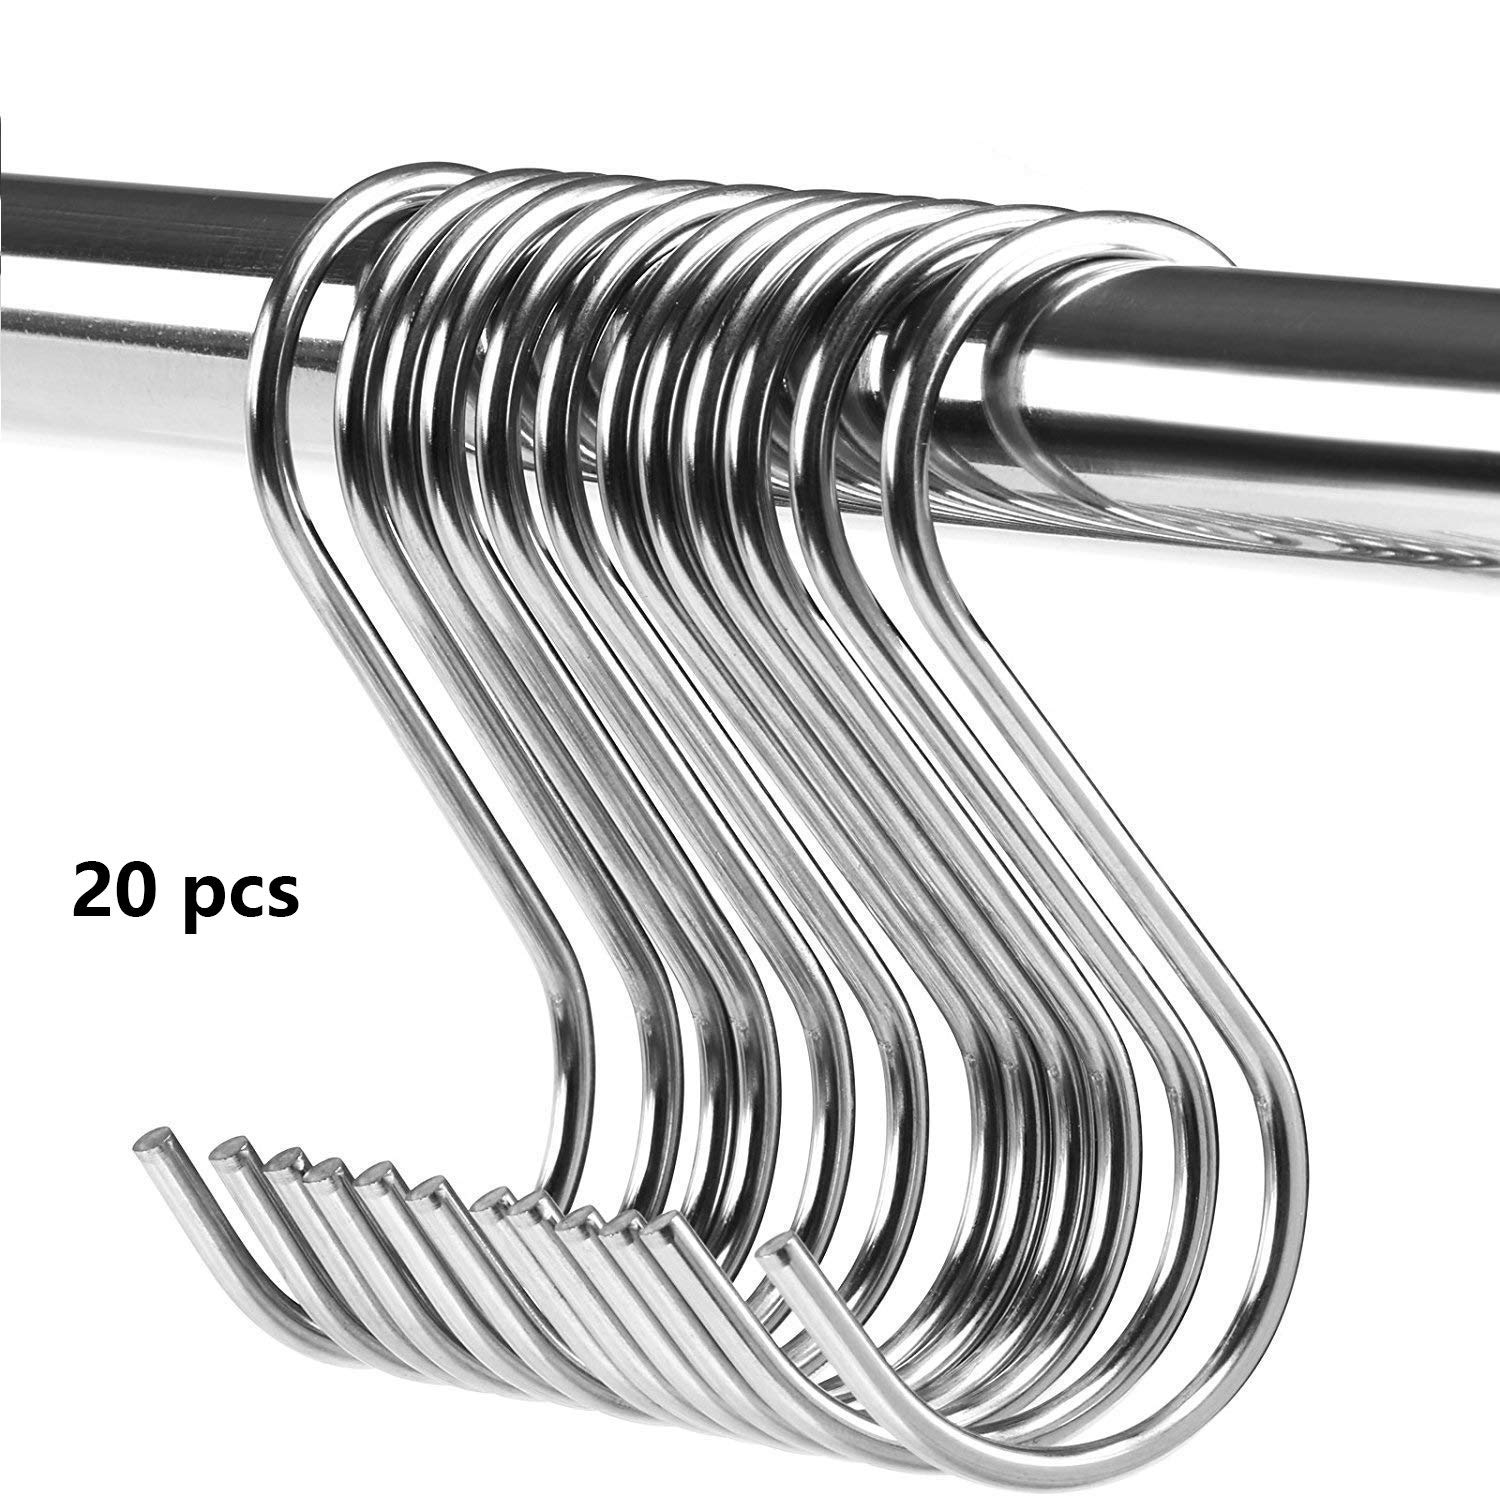 OPCC 20 PCS Stainless Steel Silver Color Extra Small Size Heavy-duty Steel S-hooks for Plants, Gardening Tools, black Enamel Coated Metal, Holds up to 40 Lbs. Includes Installation Hardware Designed for Any Kitchen+1PCS Opcc Sticky Notes